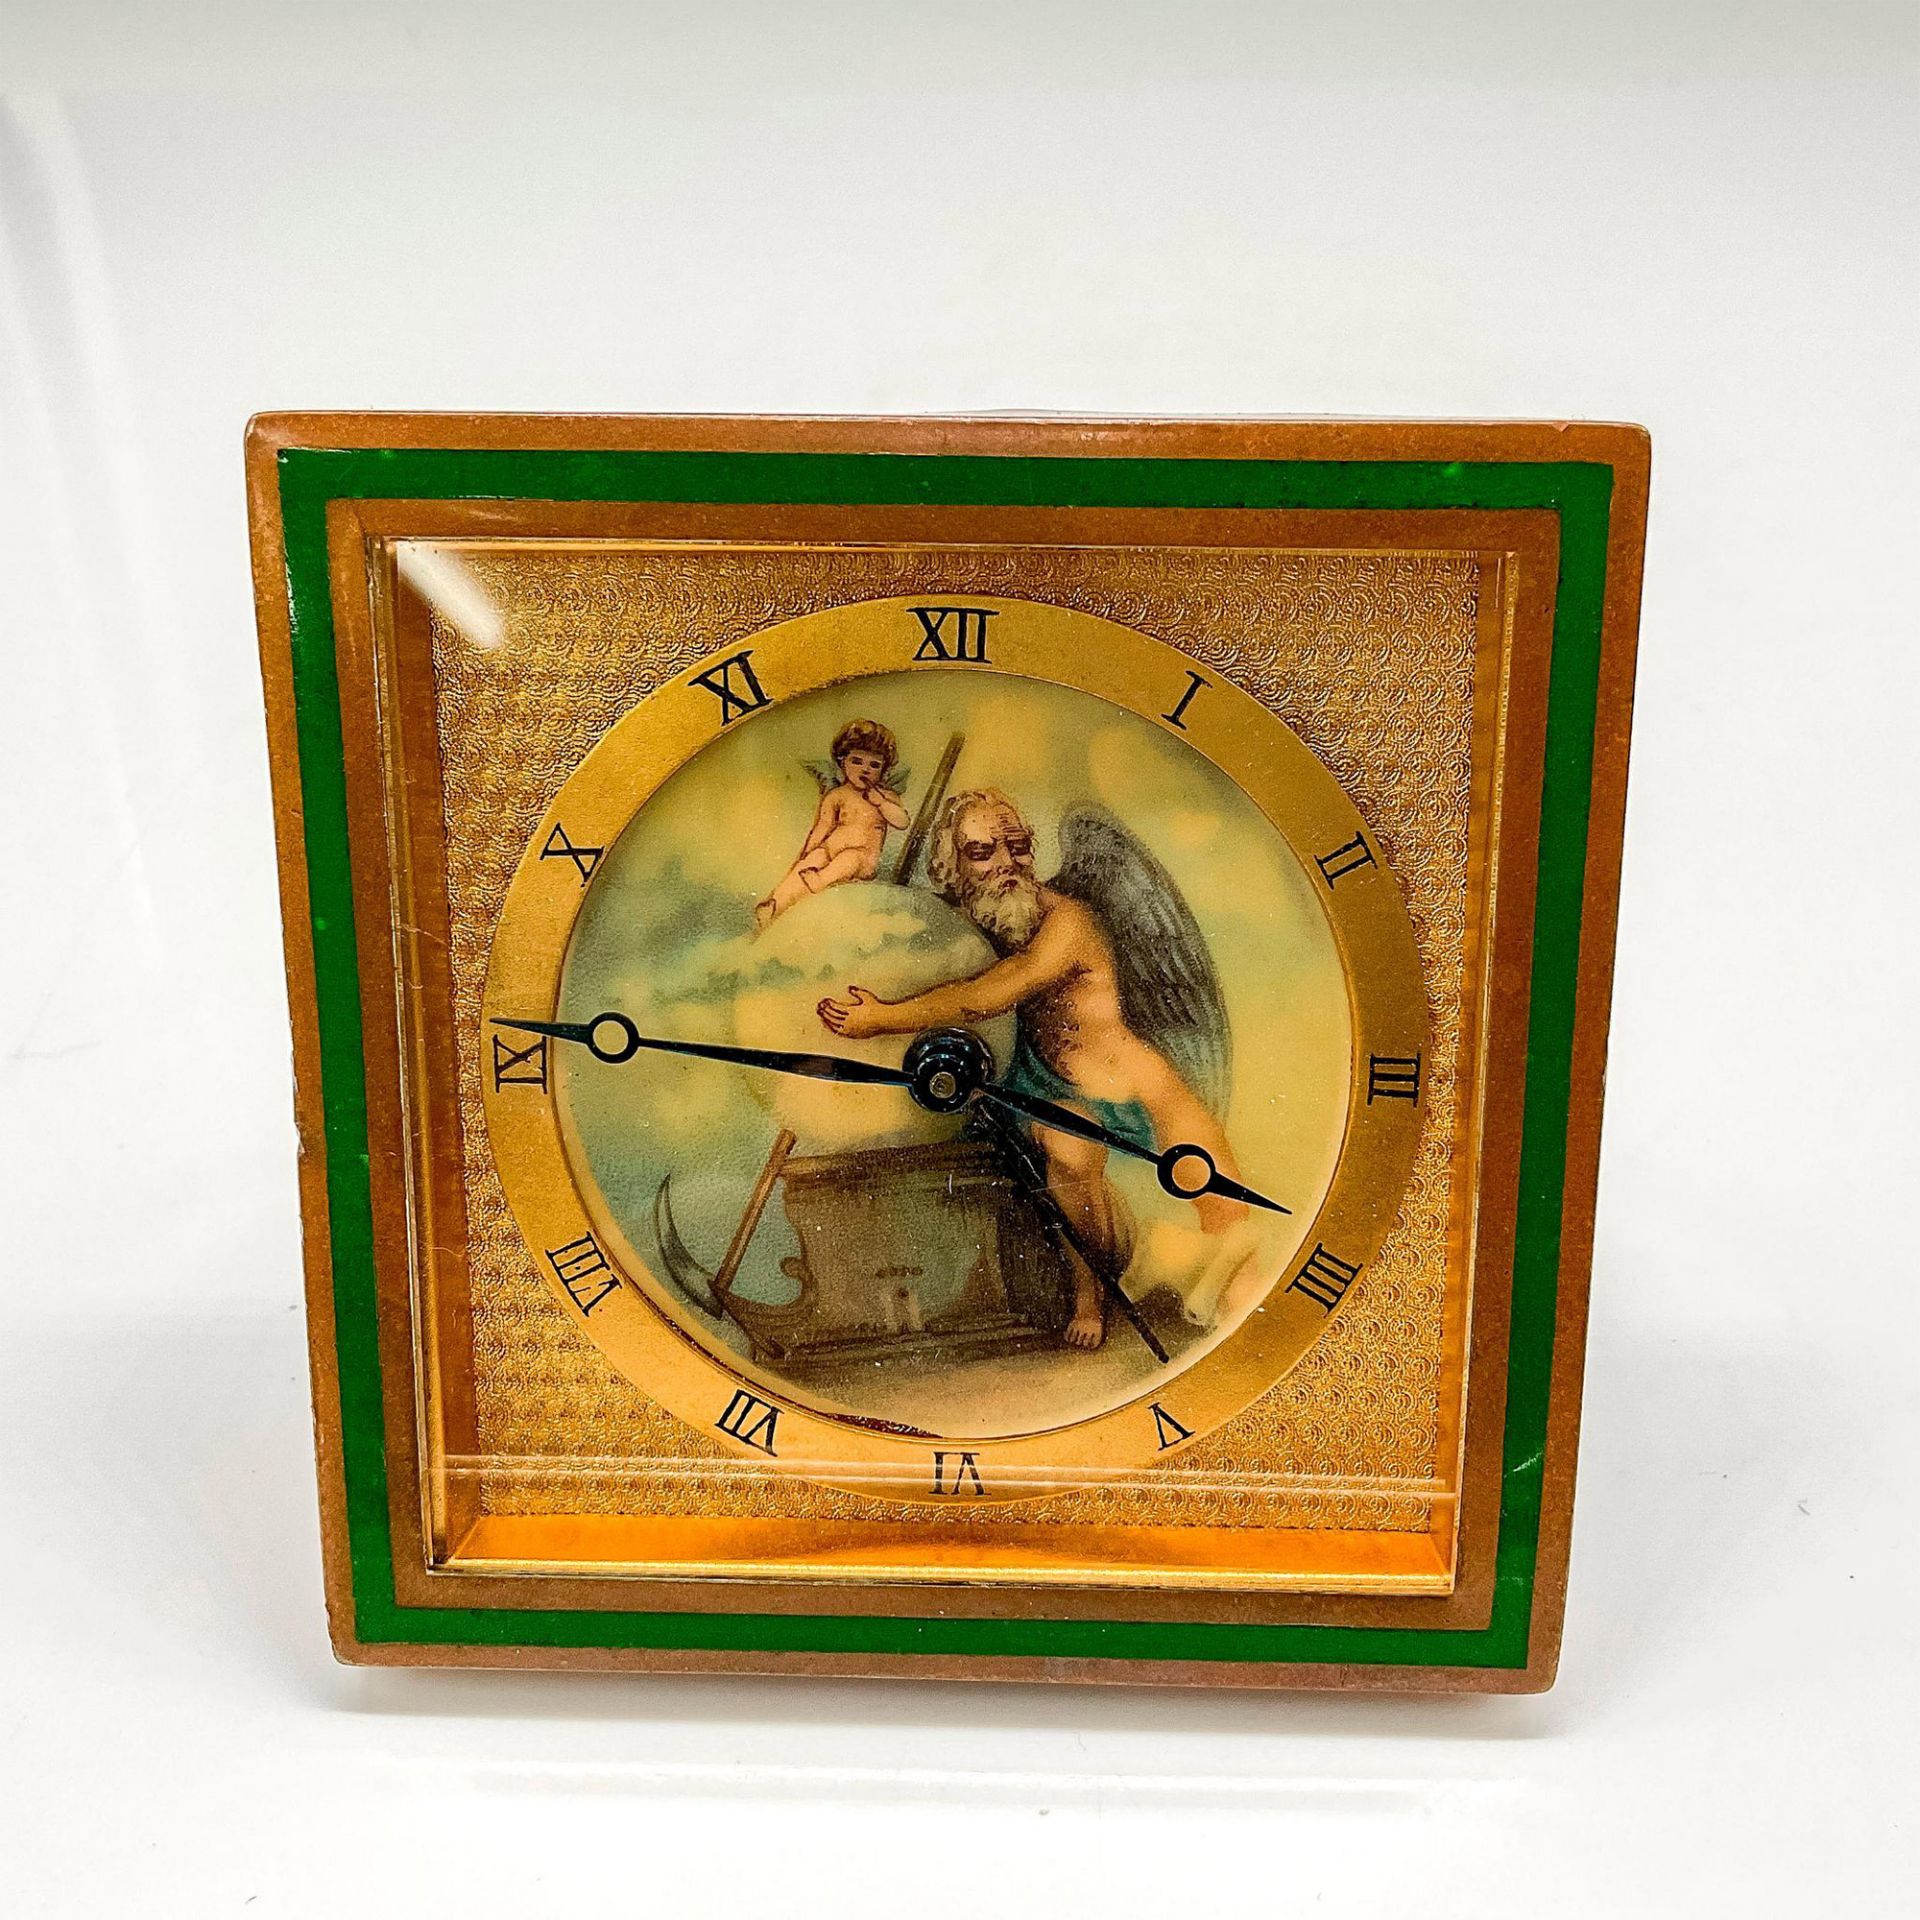 Kienzle Enameled Desk Clock with Hand painted Face - Image 4 of 4